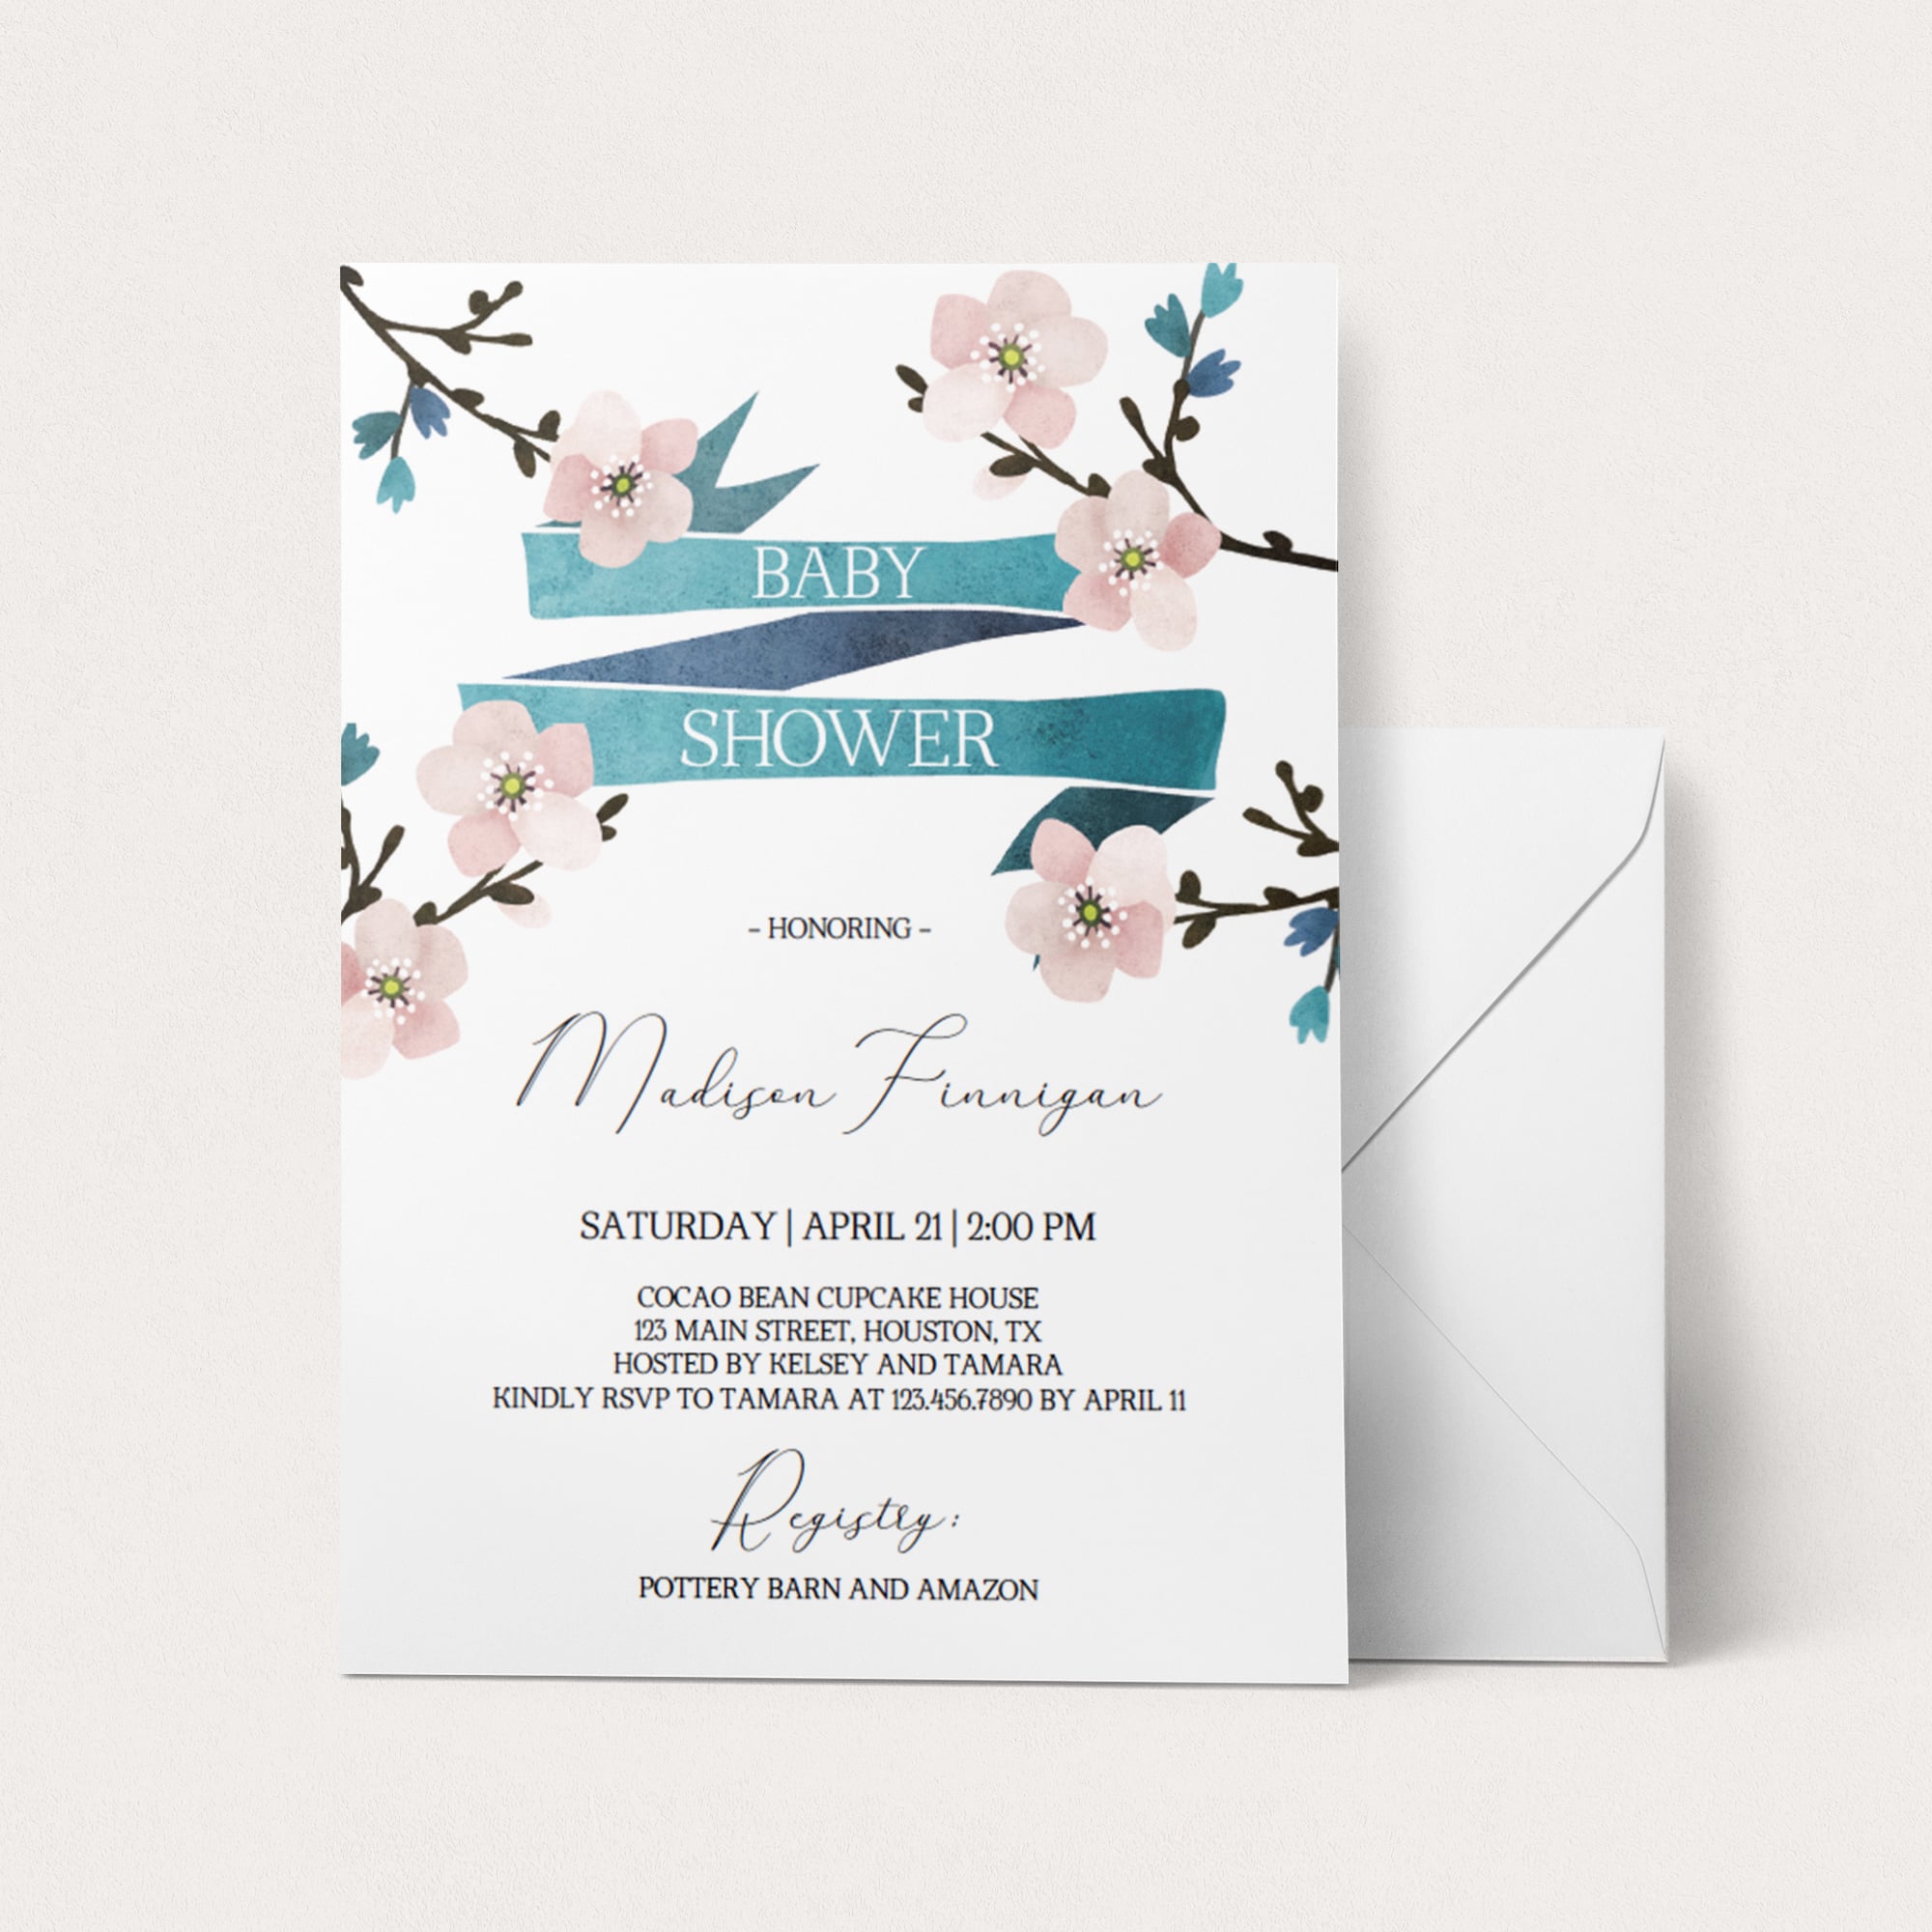 DIY baby shower invitation for girls by LittleSizzle